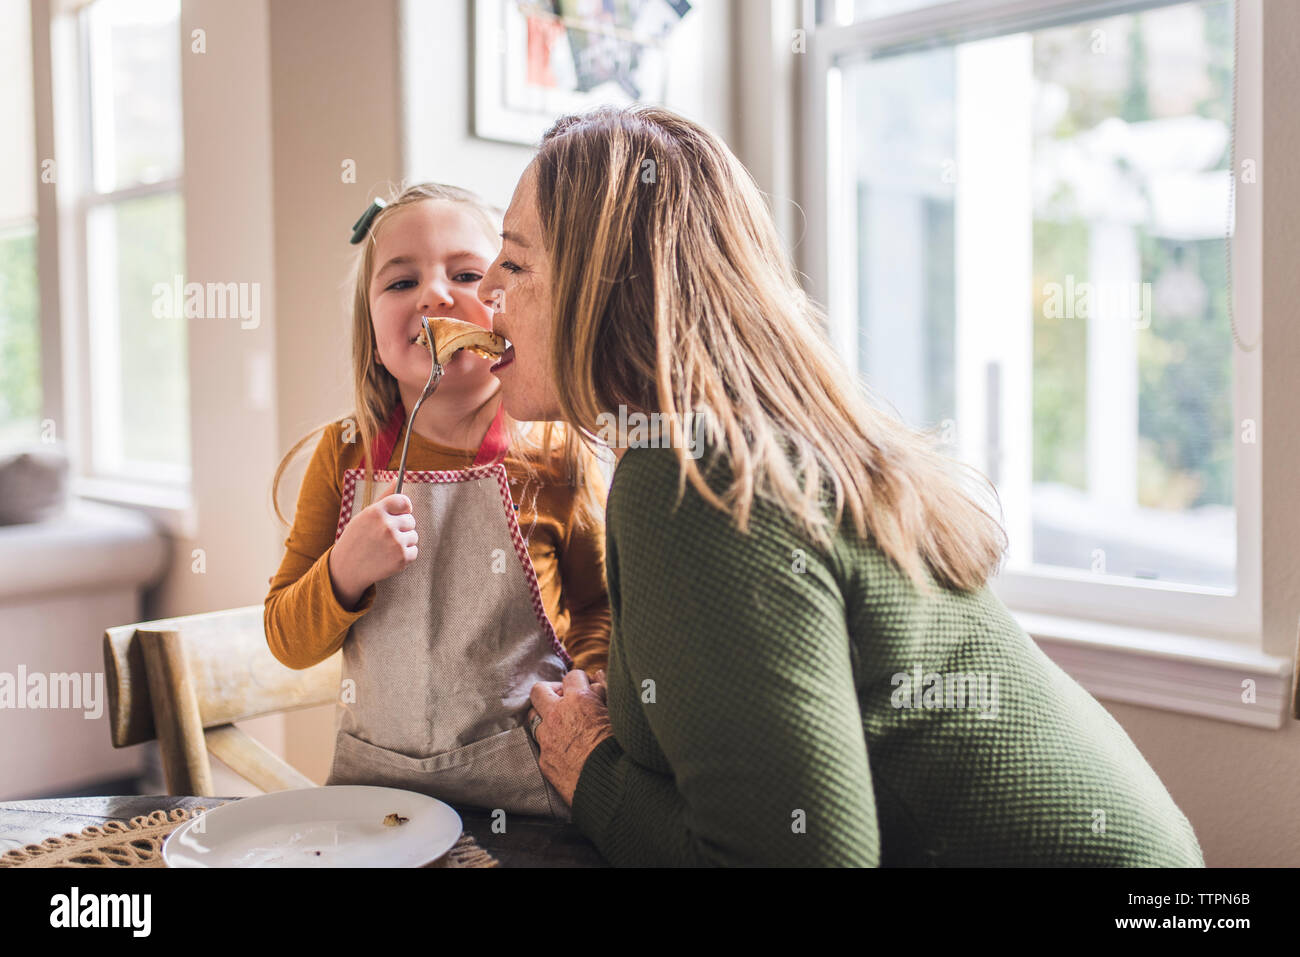 Granddaughter feeding pancakes to grandmother at kitchen table Stock Photo